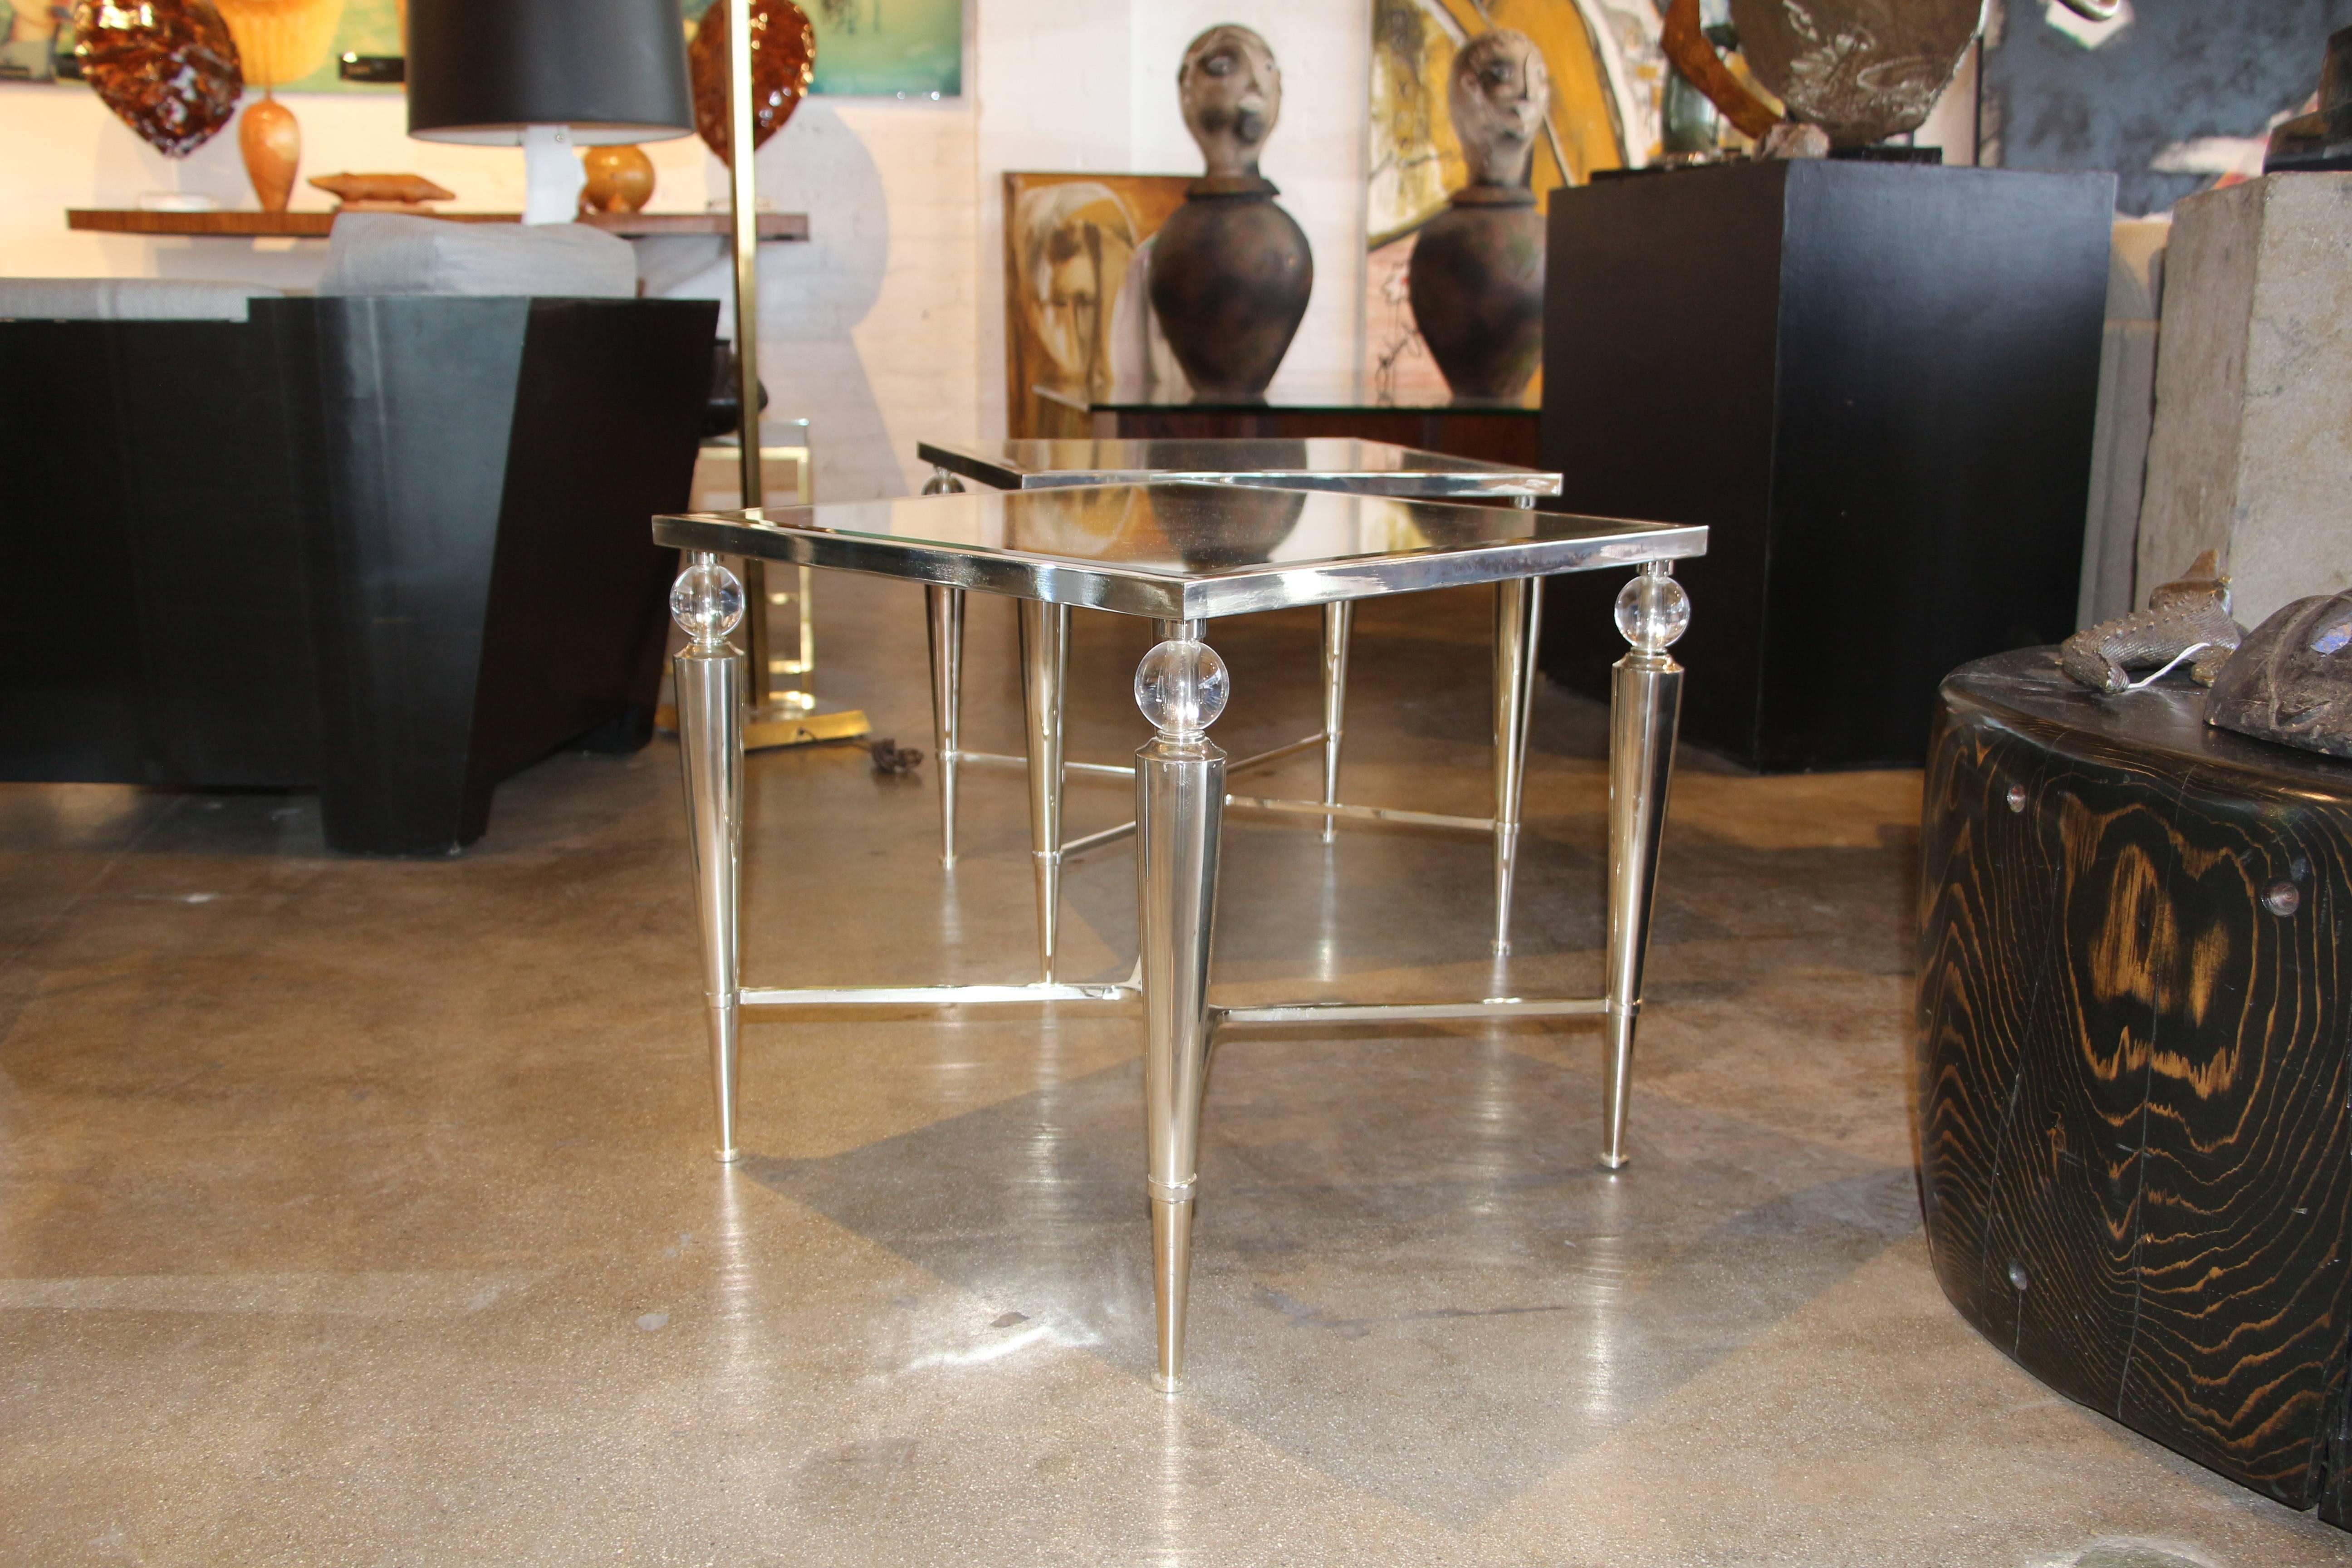 Two elegant silvered mirror top accent or side tables. The glass ball supports are a nice feature. Nicely made and of high quality. There are scratches to the mirror tops and the metal bases, pictured.